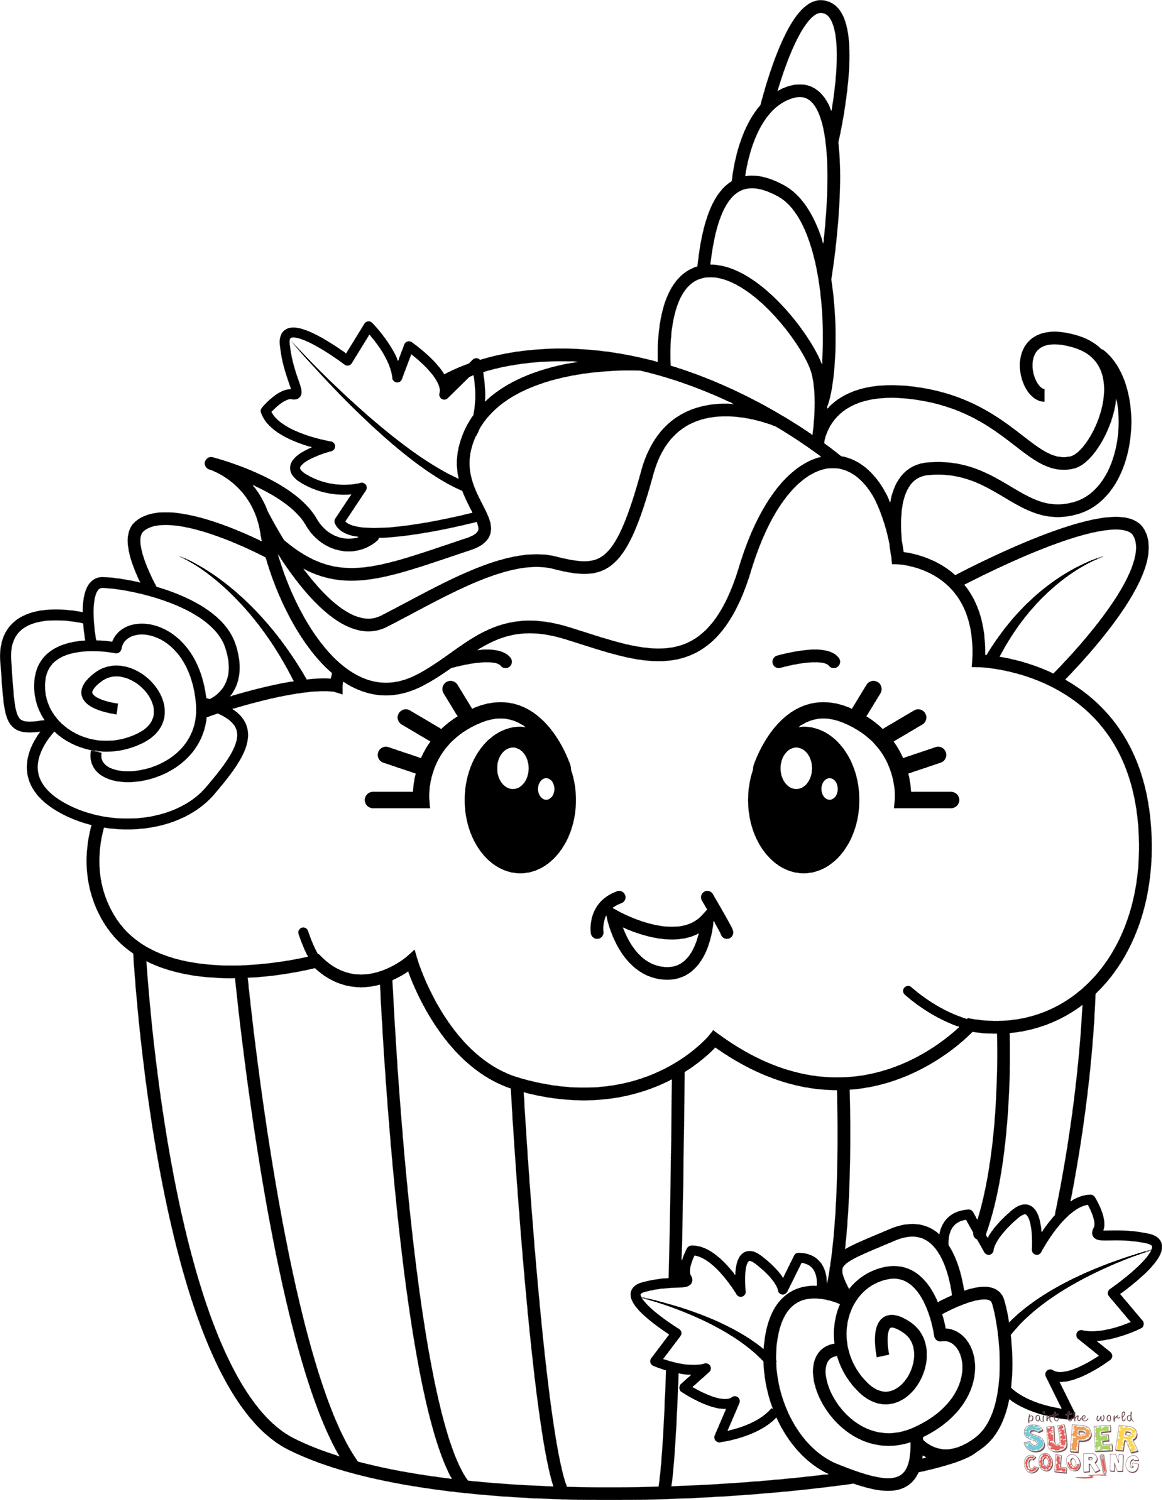 Unicorn Cake coloring page | Free Printable Coloring Pages